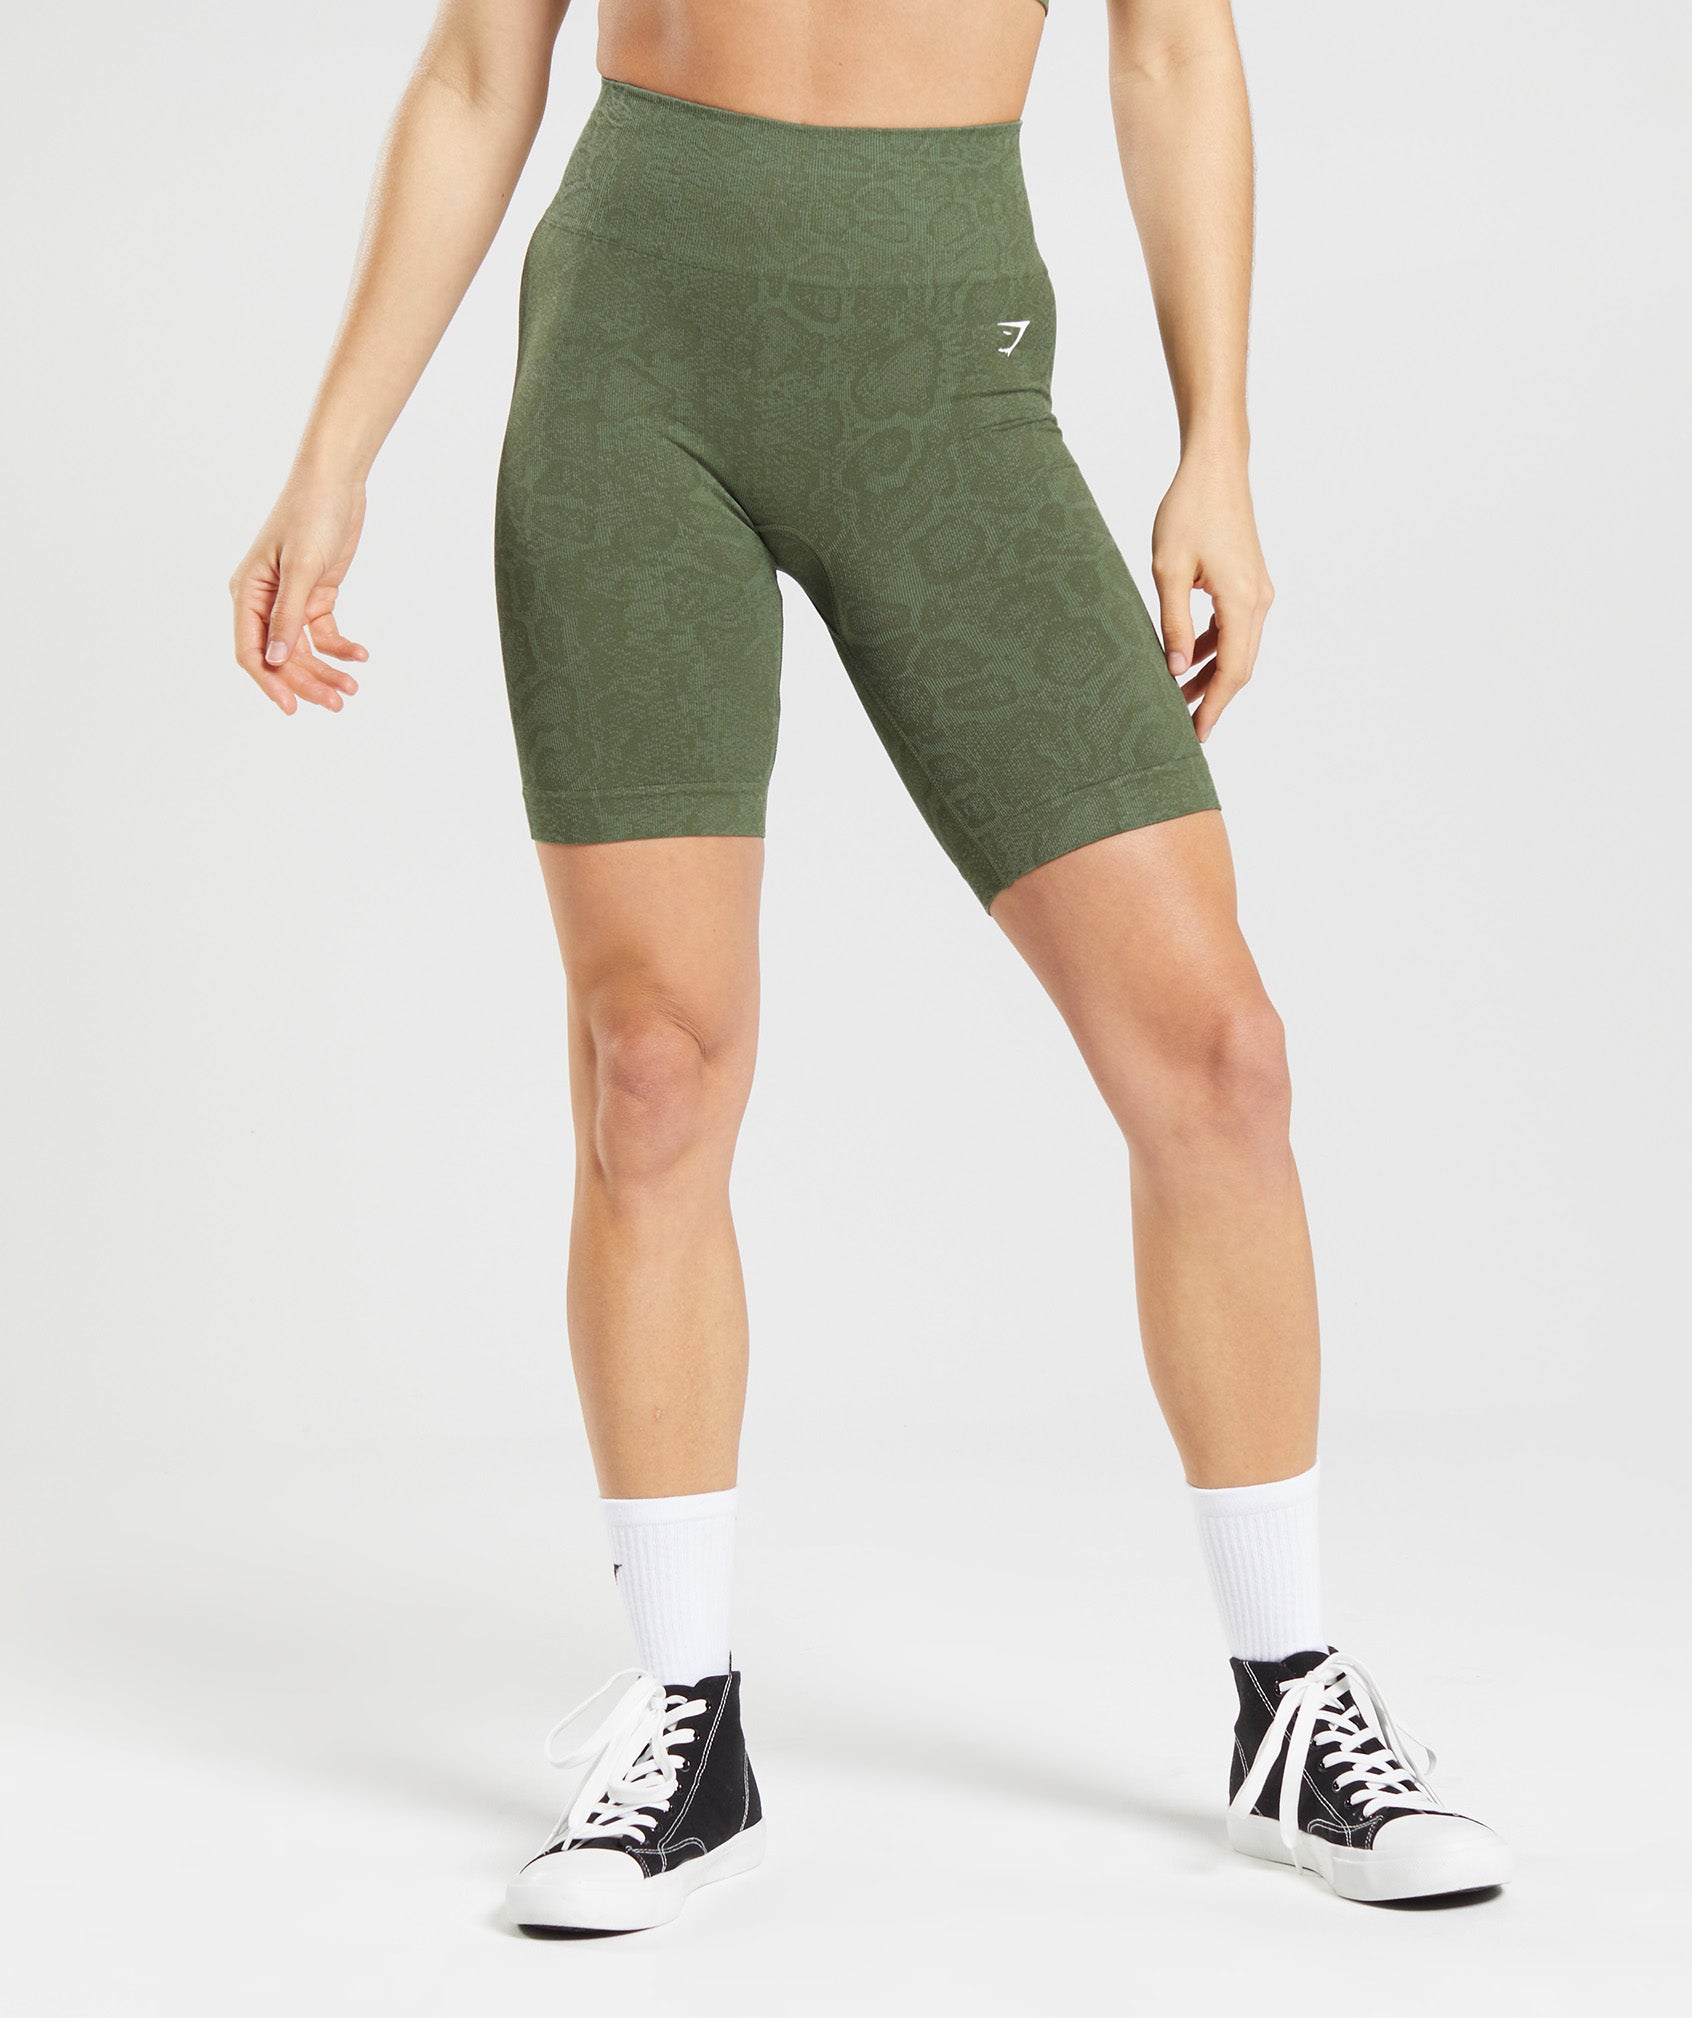 Adapt Animal Seamless Cycling Shorts in {{variantColor} is out of stock